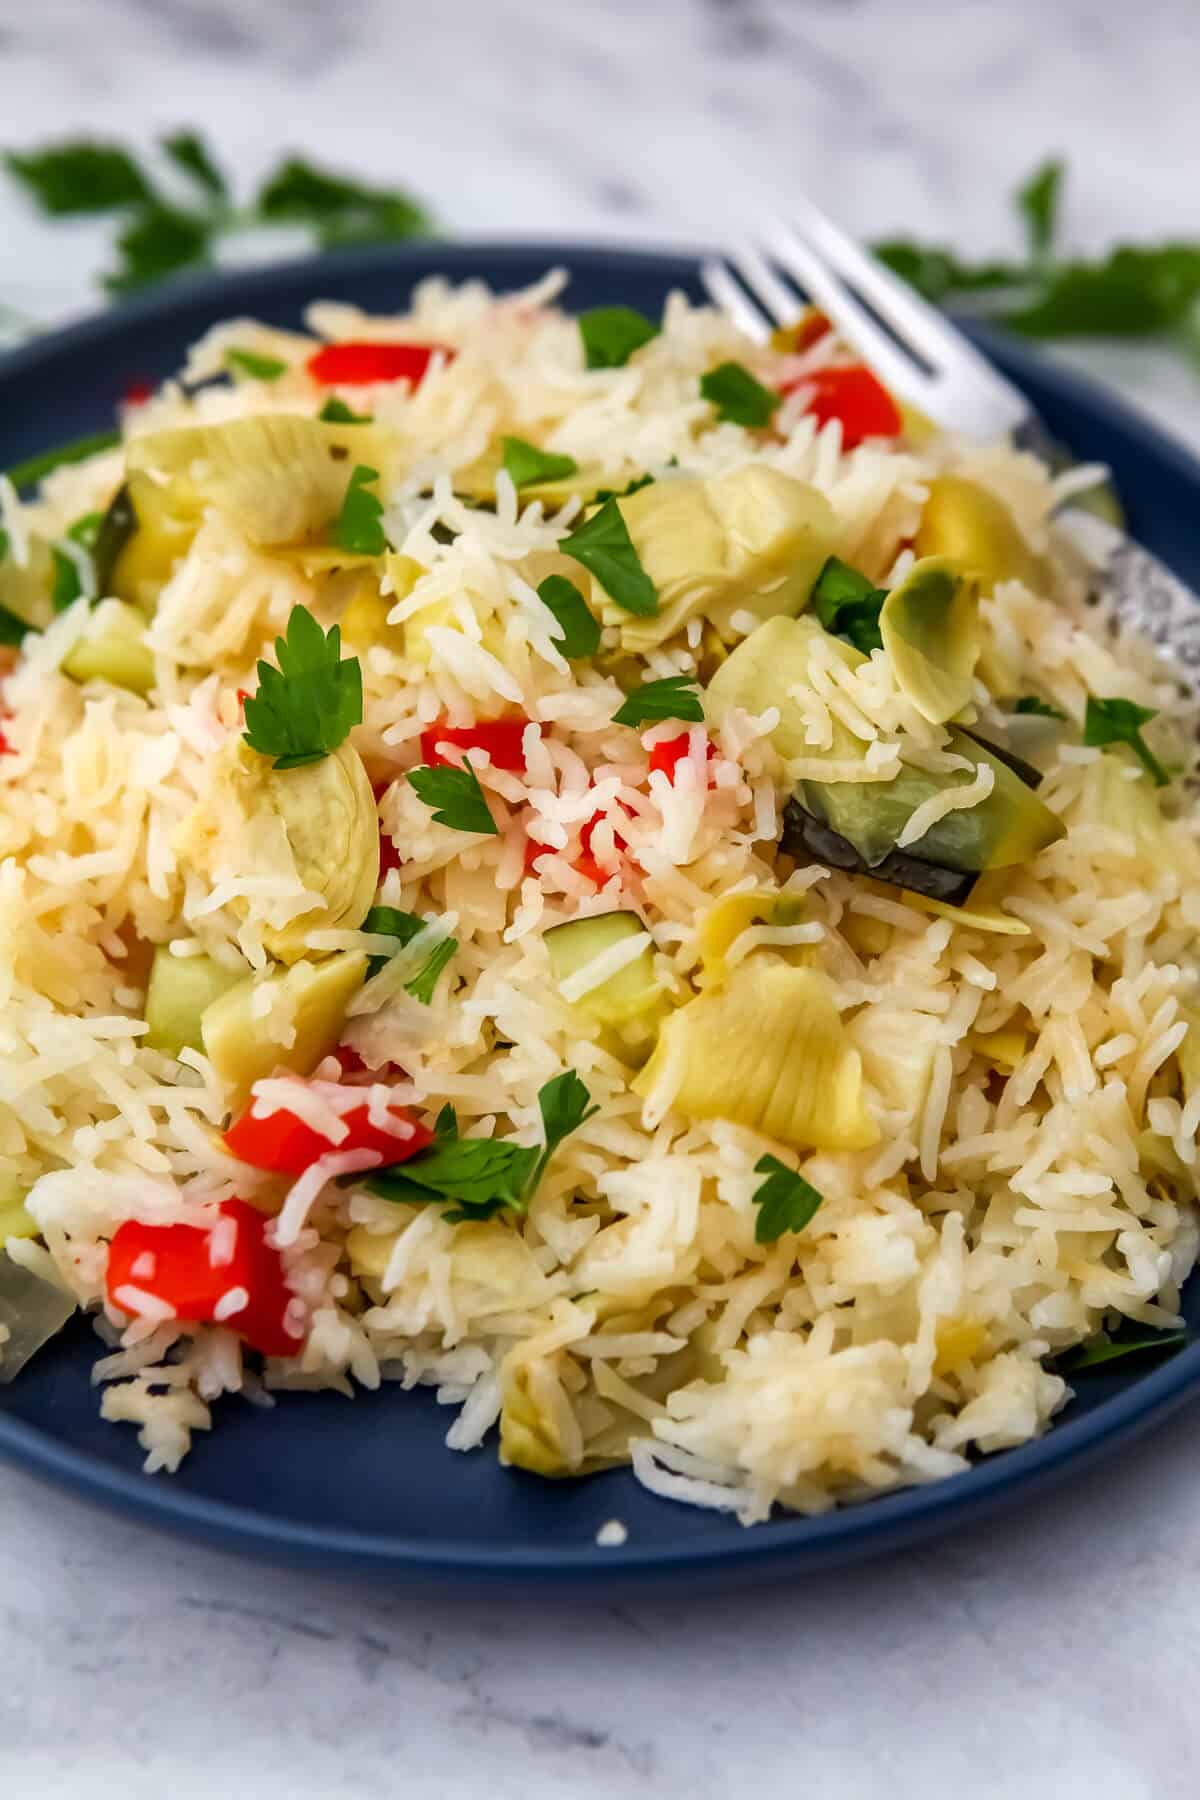 A blue plate full of vegan rice pilaf made with onions, peppers, and artichoke hearts topped with lemon juice and parsley.